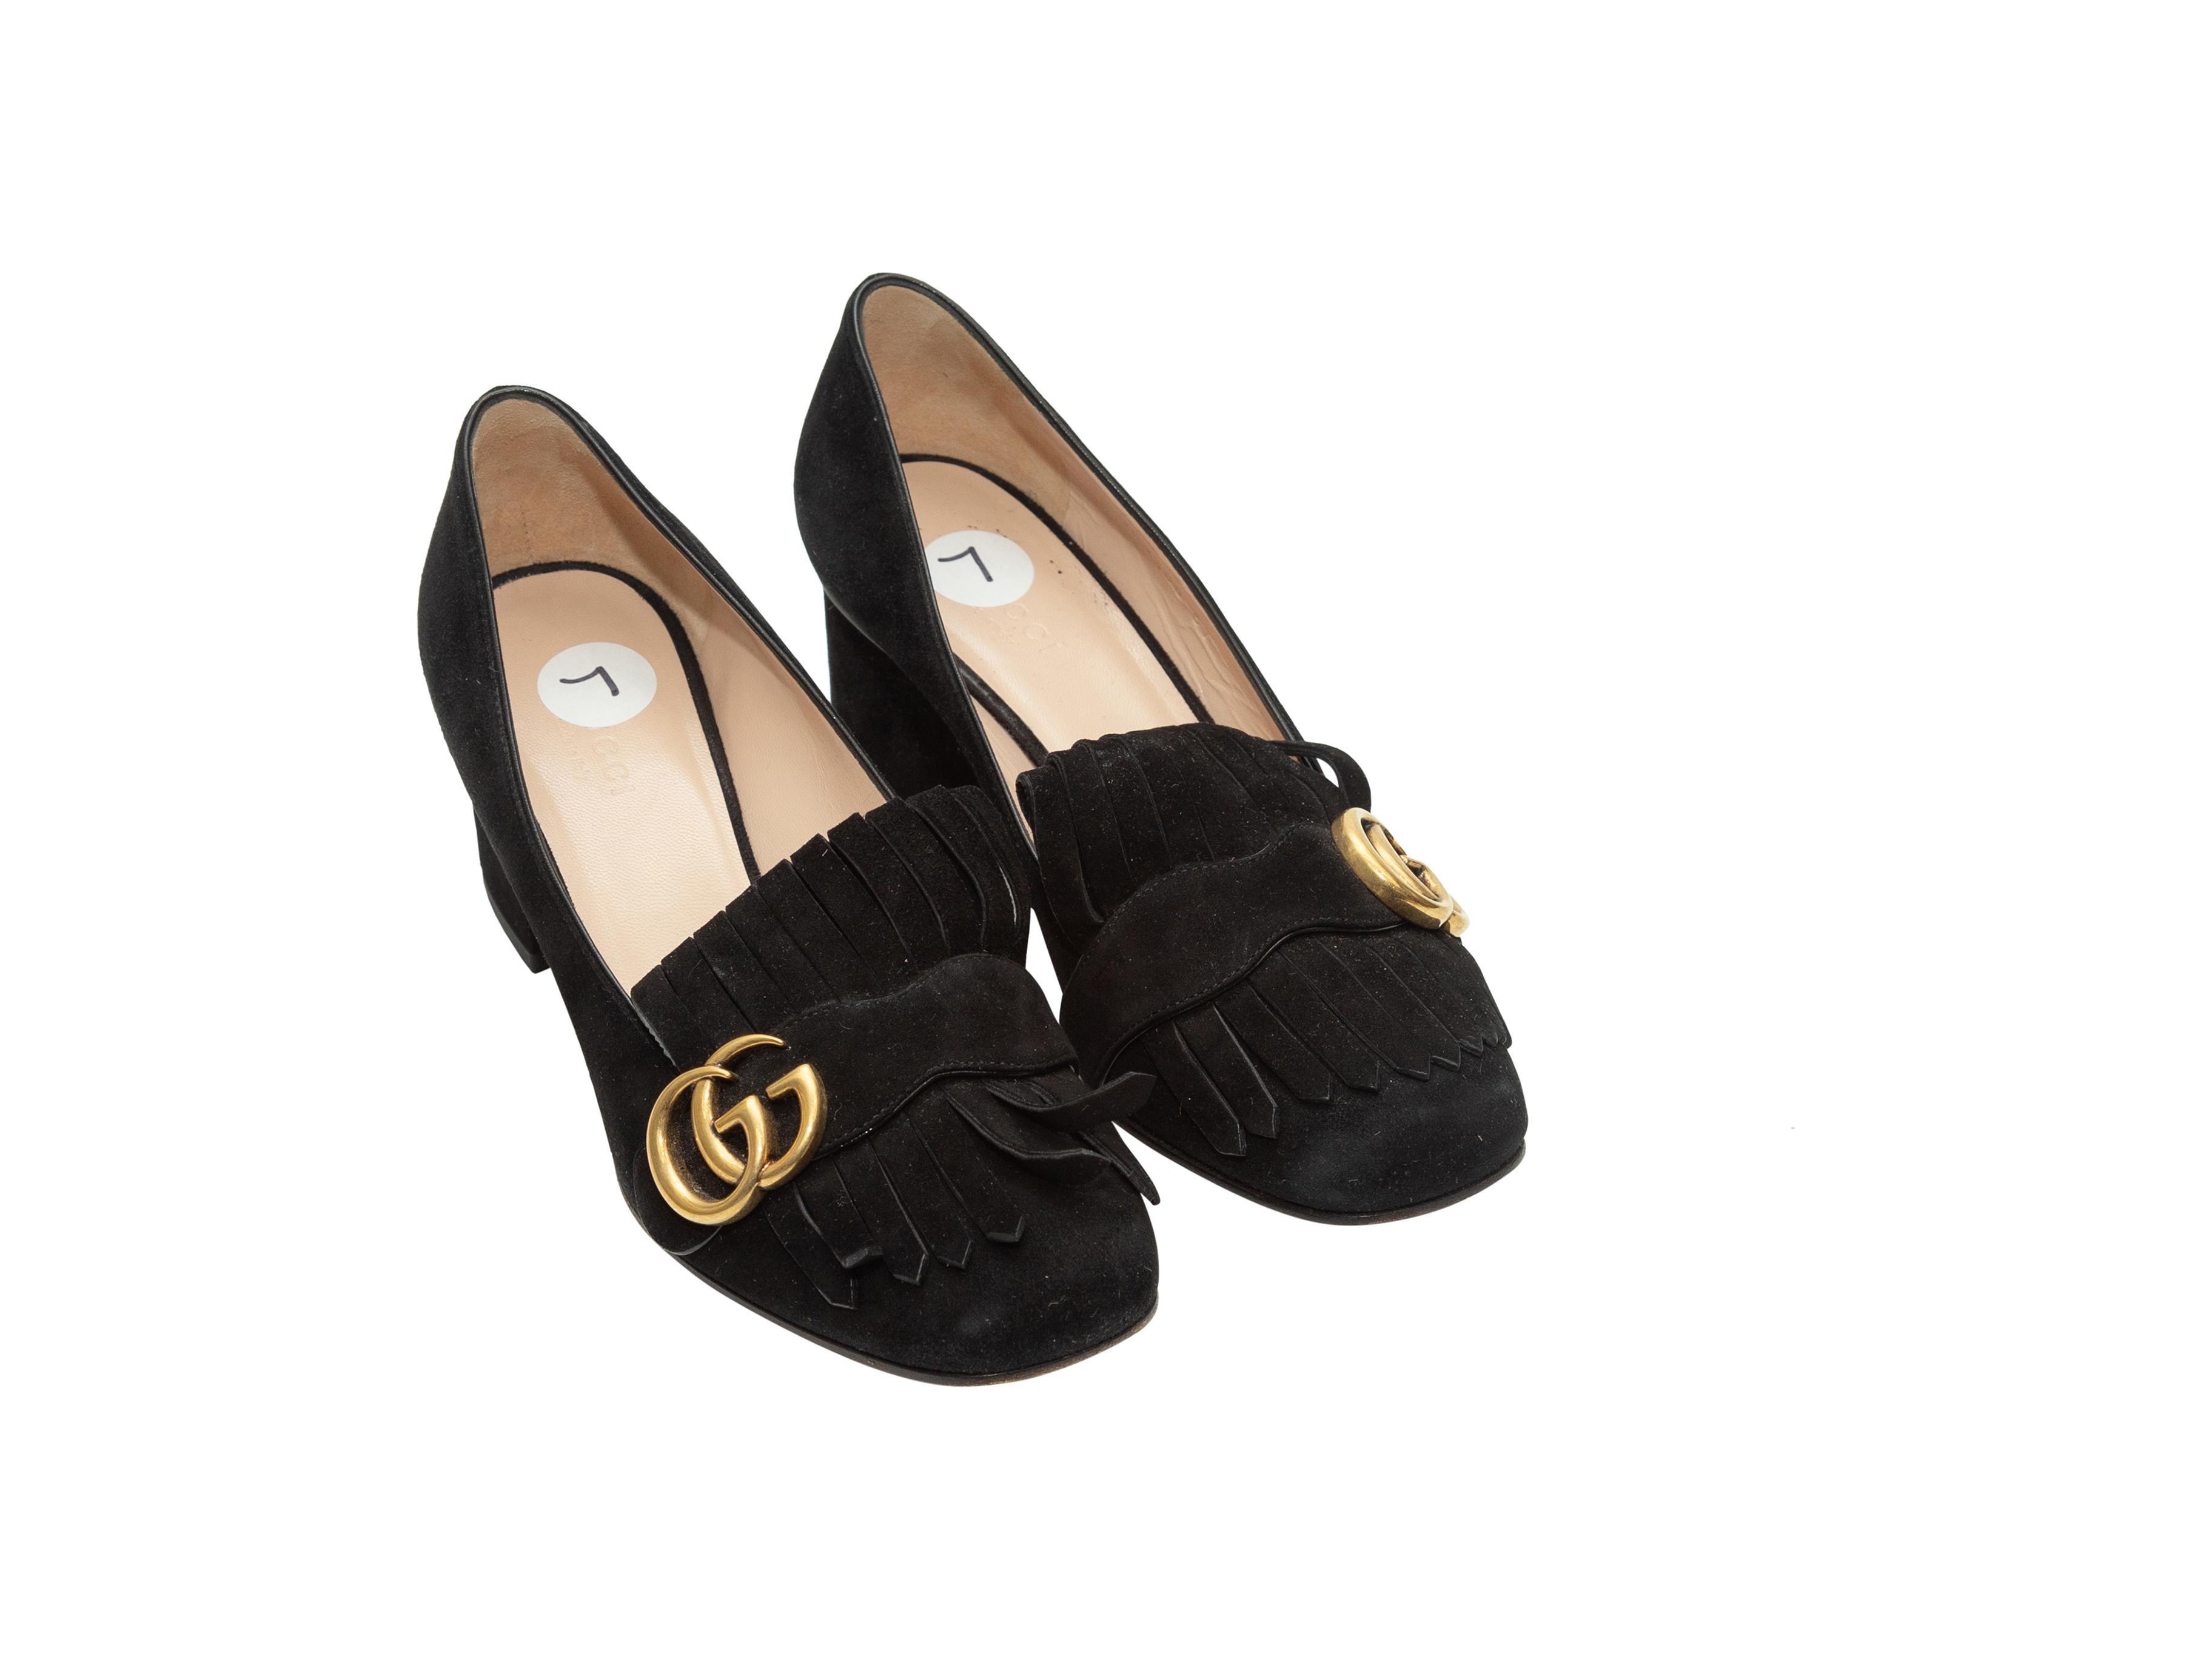 Product details: Black round-toe suede Marmont pumps by Gucci. Kiltie detailing at toes featuring gold-tone GG logo embellishments. Block heels. Designer size 37. 2